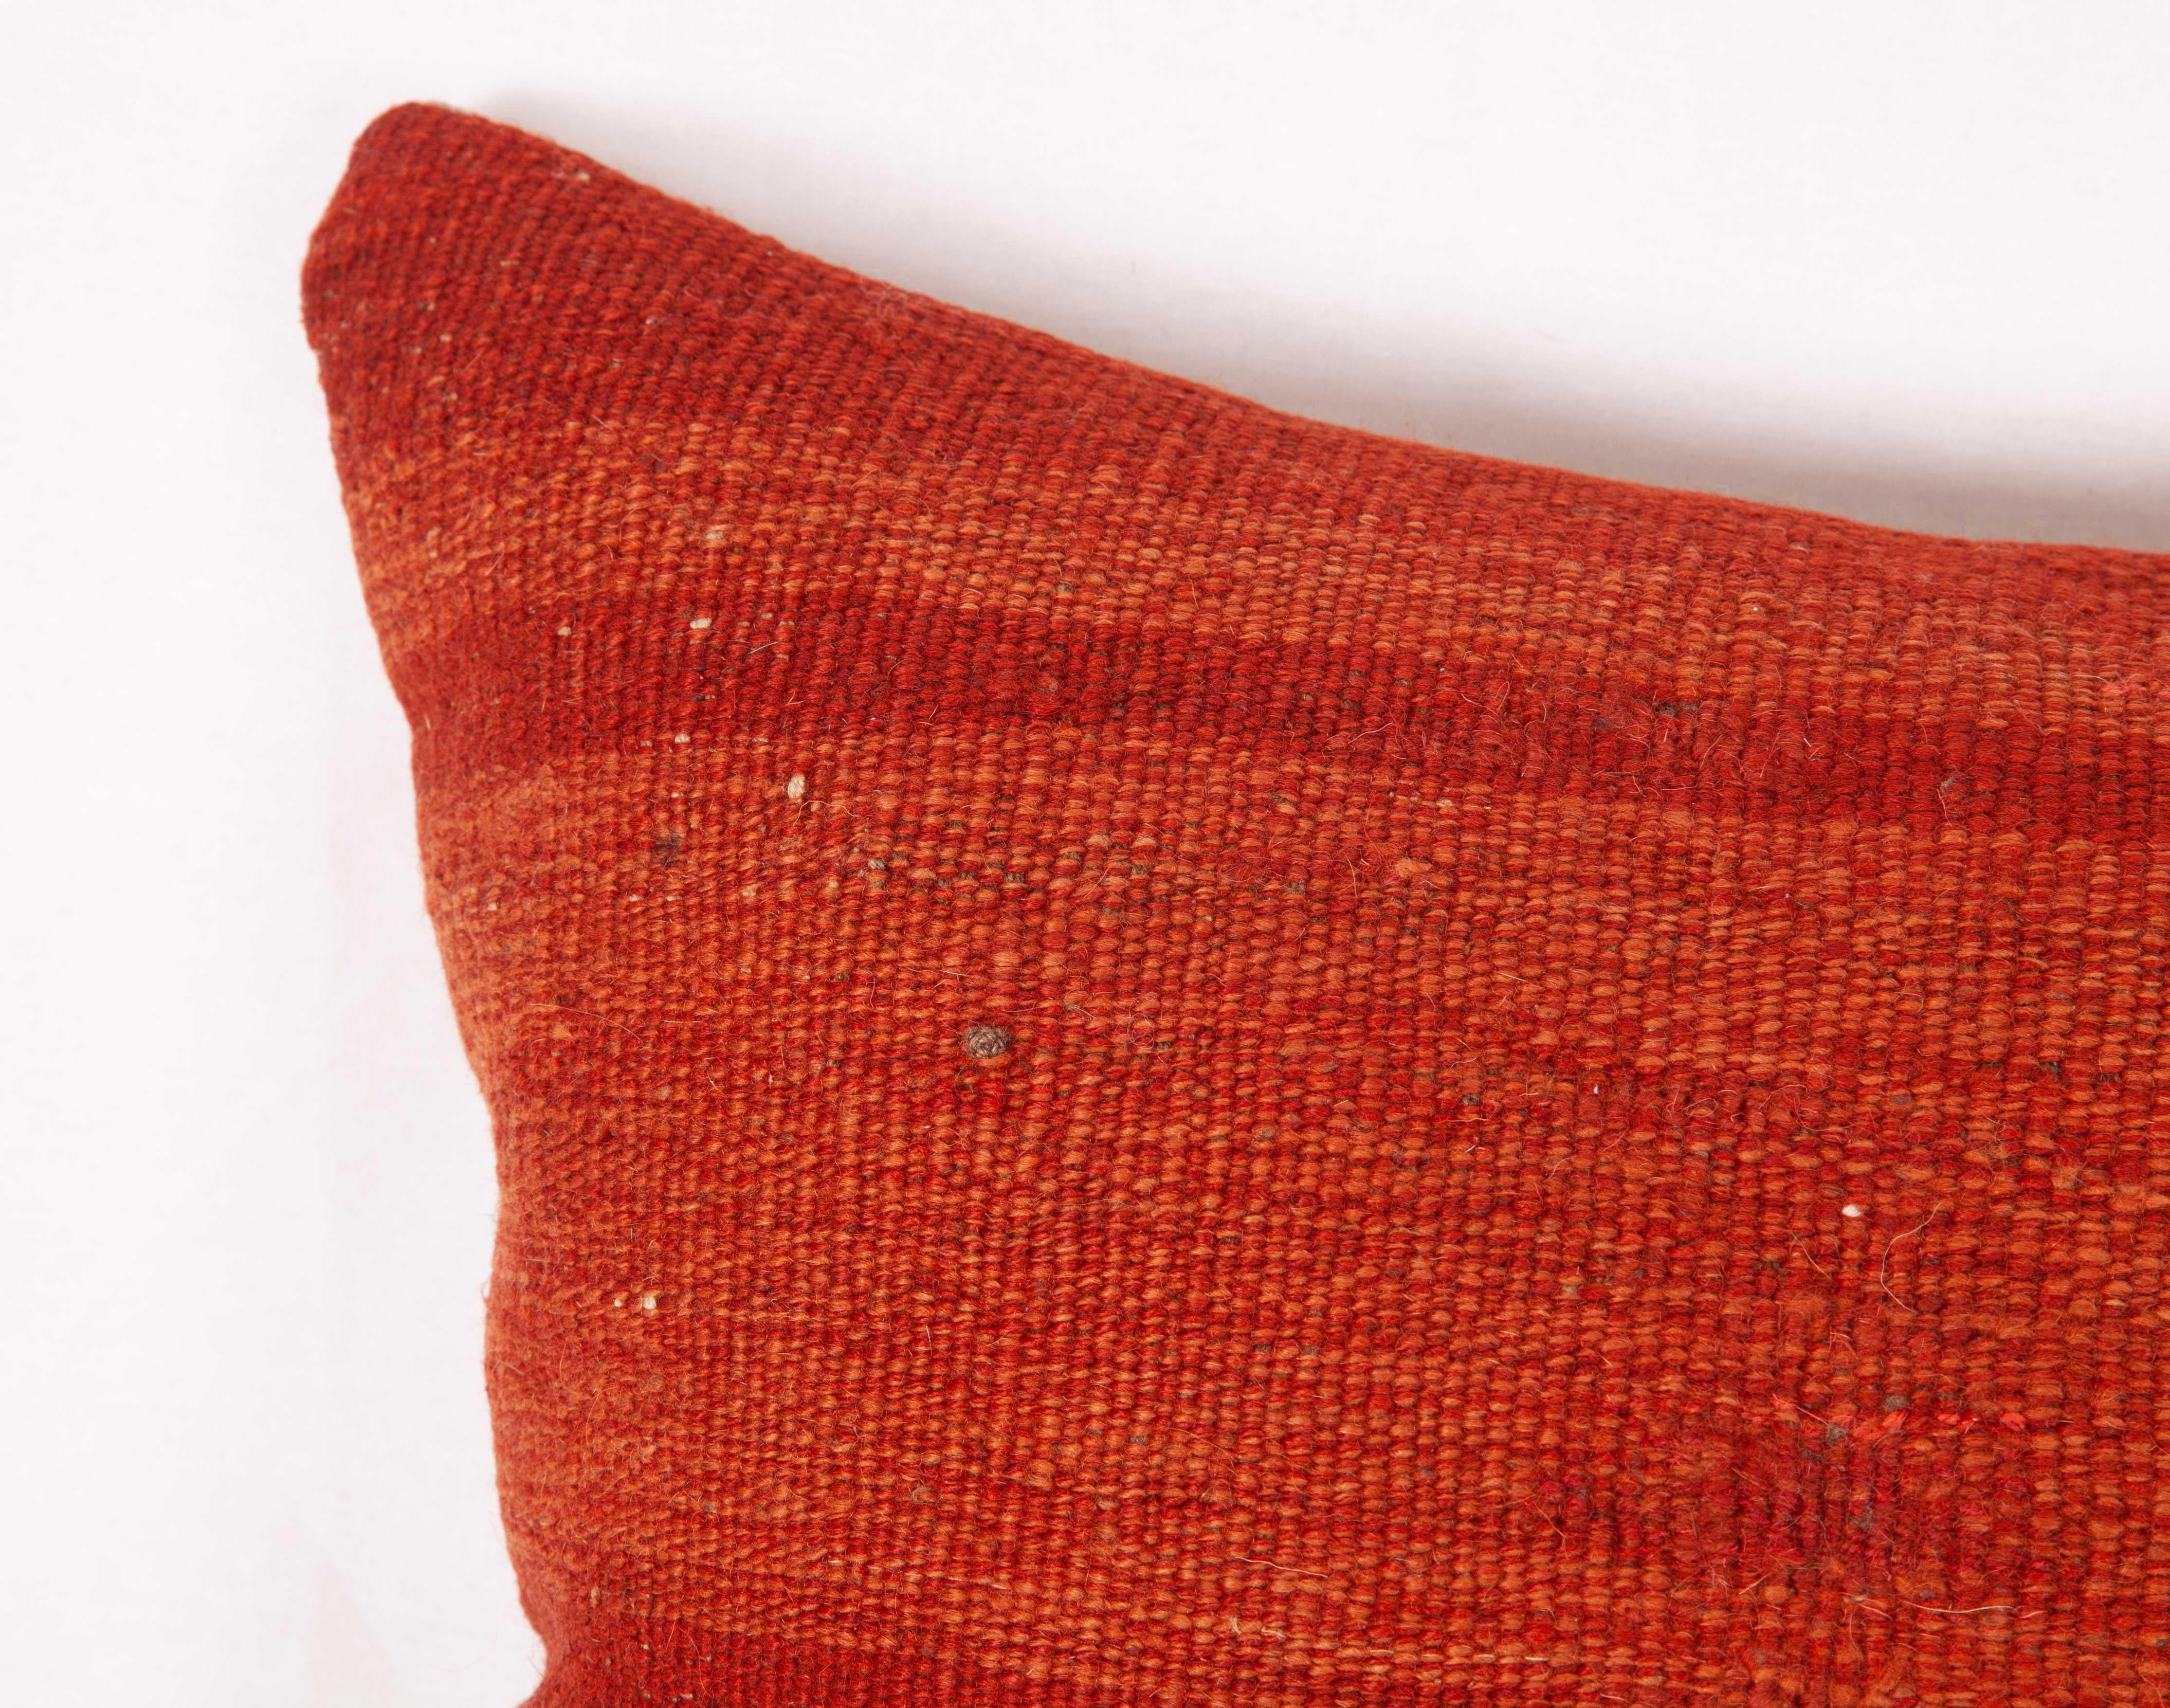 Hand-Woven Pillow Case Fashioned from a Late 19th-Early 20th Century, Minimalist Kilim